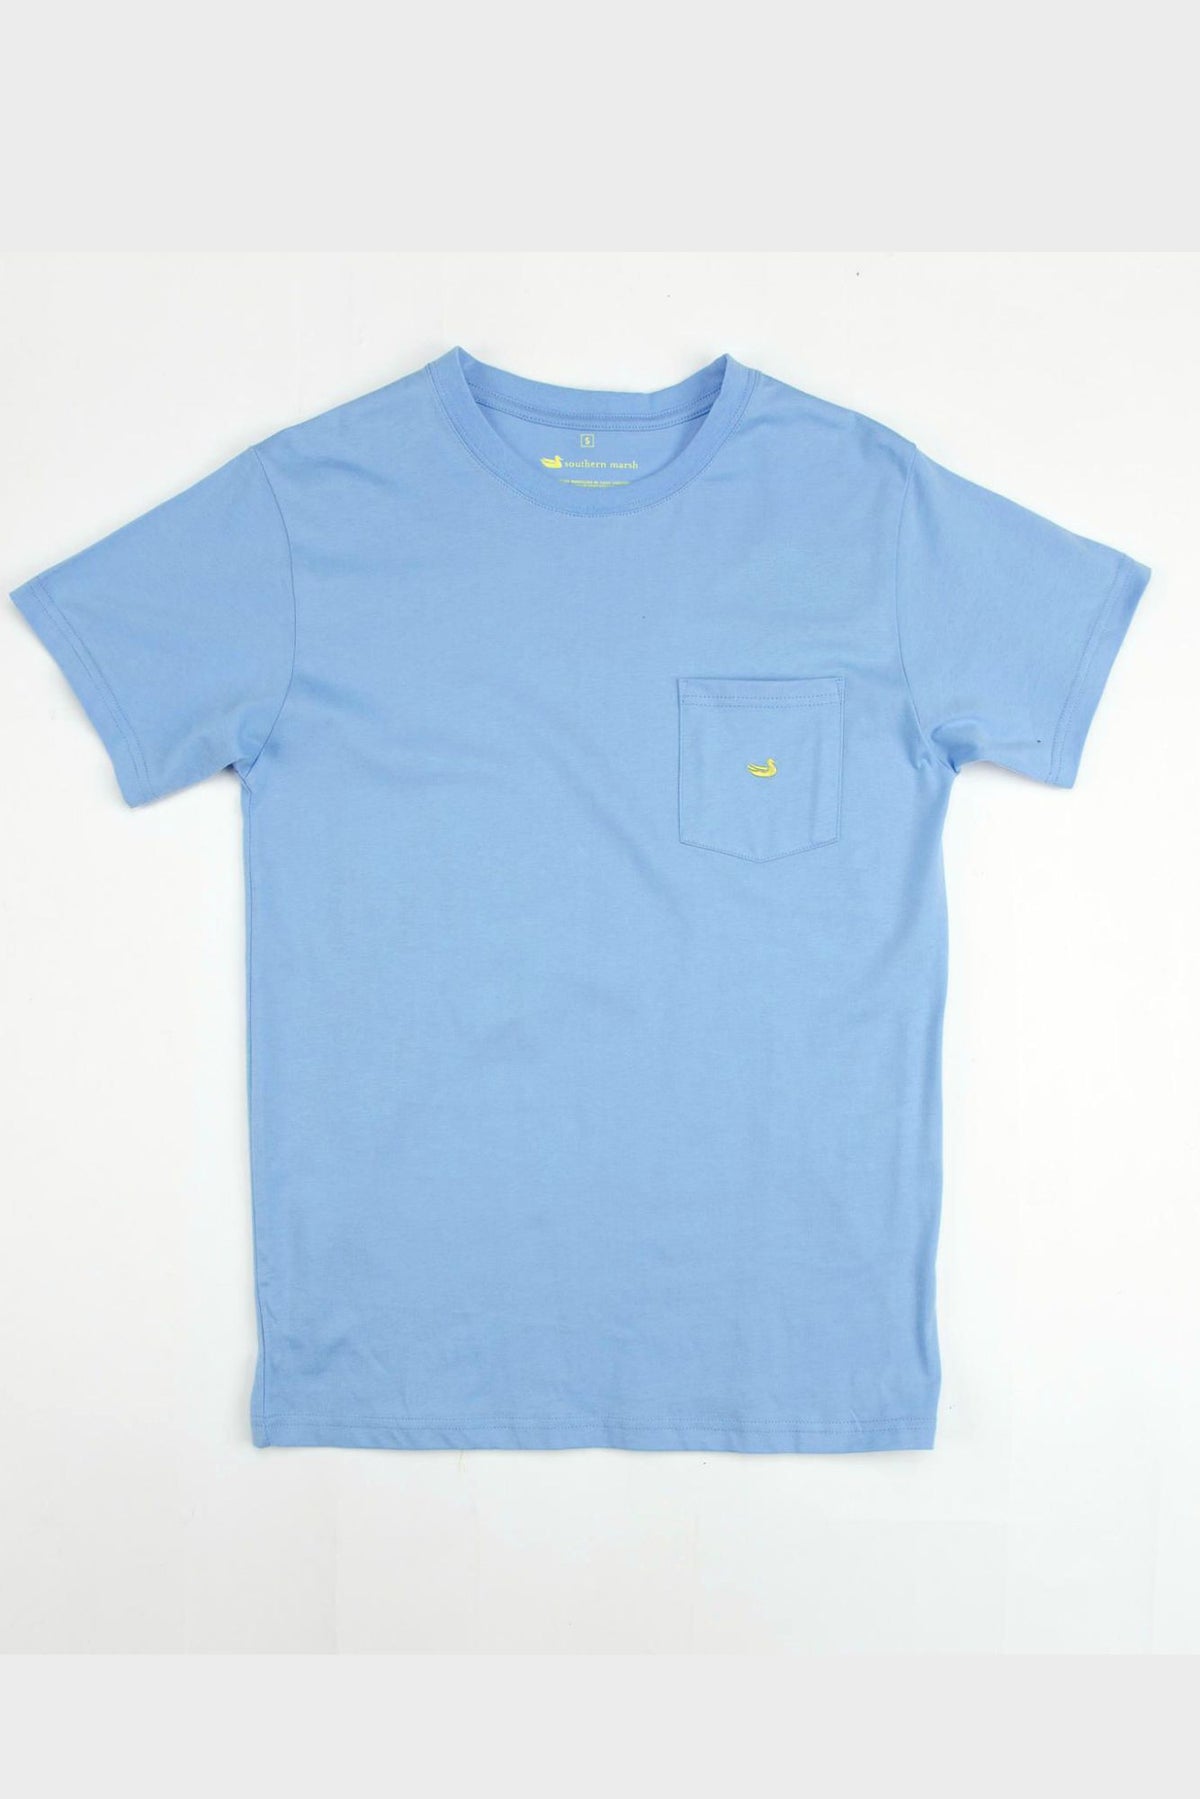 Southern Marsh: Embroidered Pocket Tee, Breaker Blue